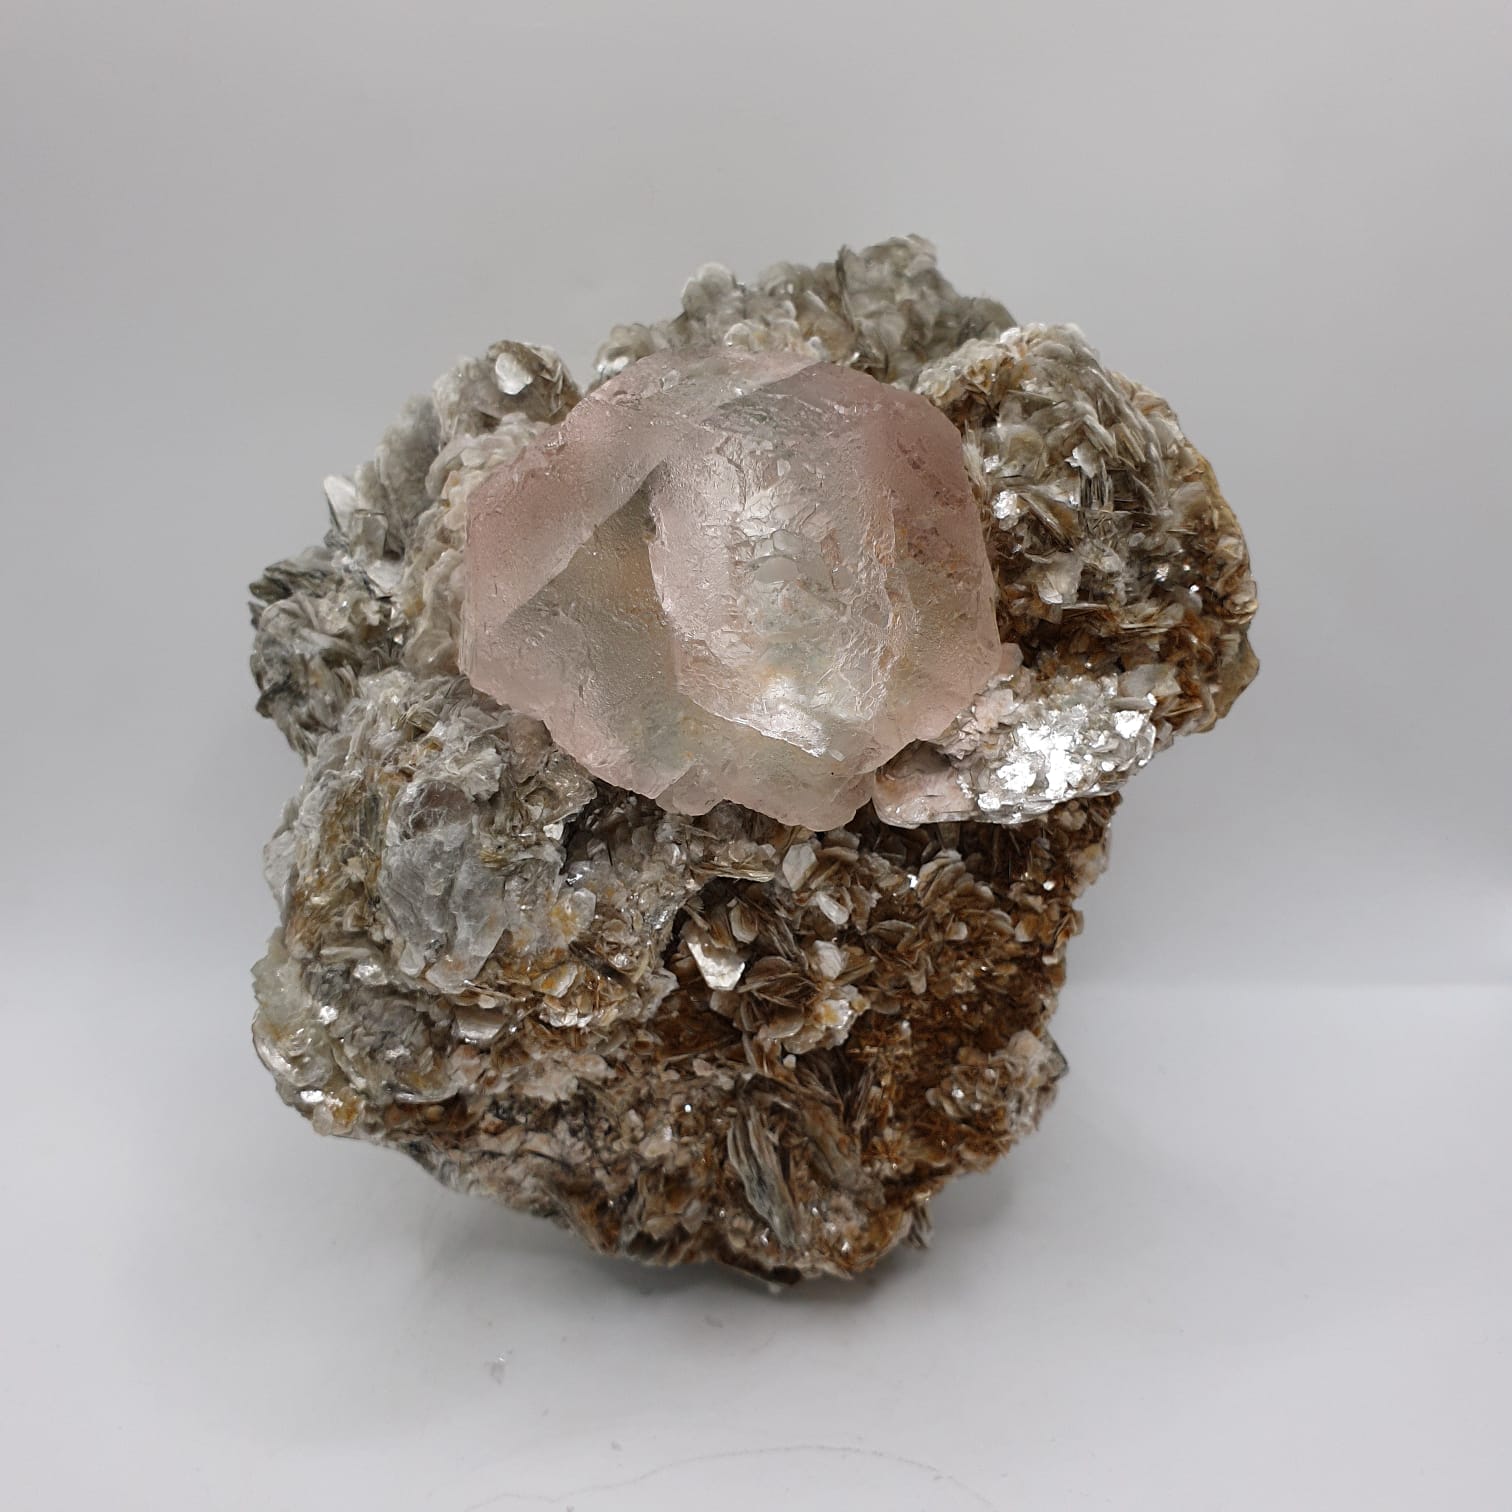 Aesthetic And Attractive Focal Crystal Of Pink Fluorite On Muscovite